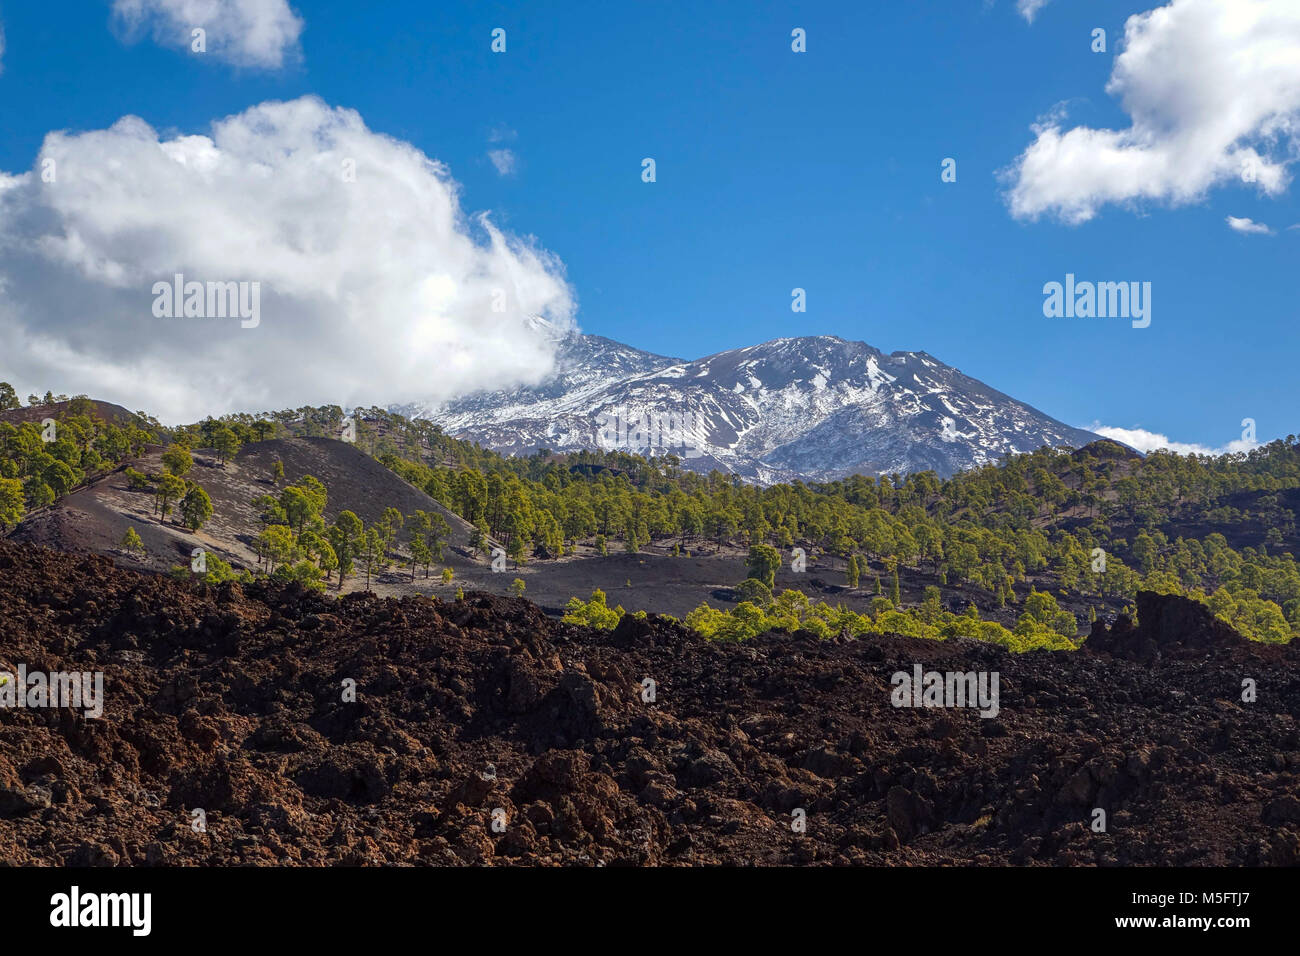 Volcanic lava flows and pine forests on El Tiede mountain, Teneriffe Stock Photo